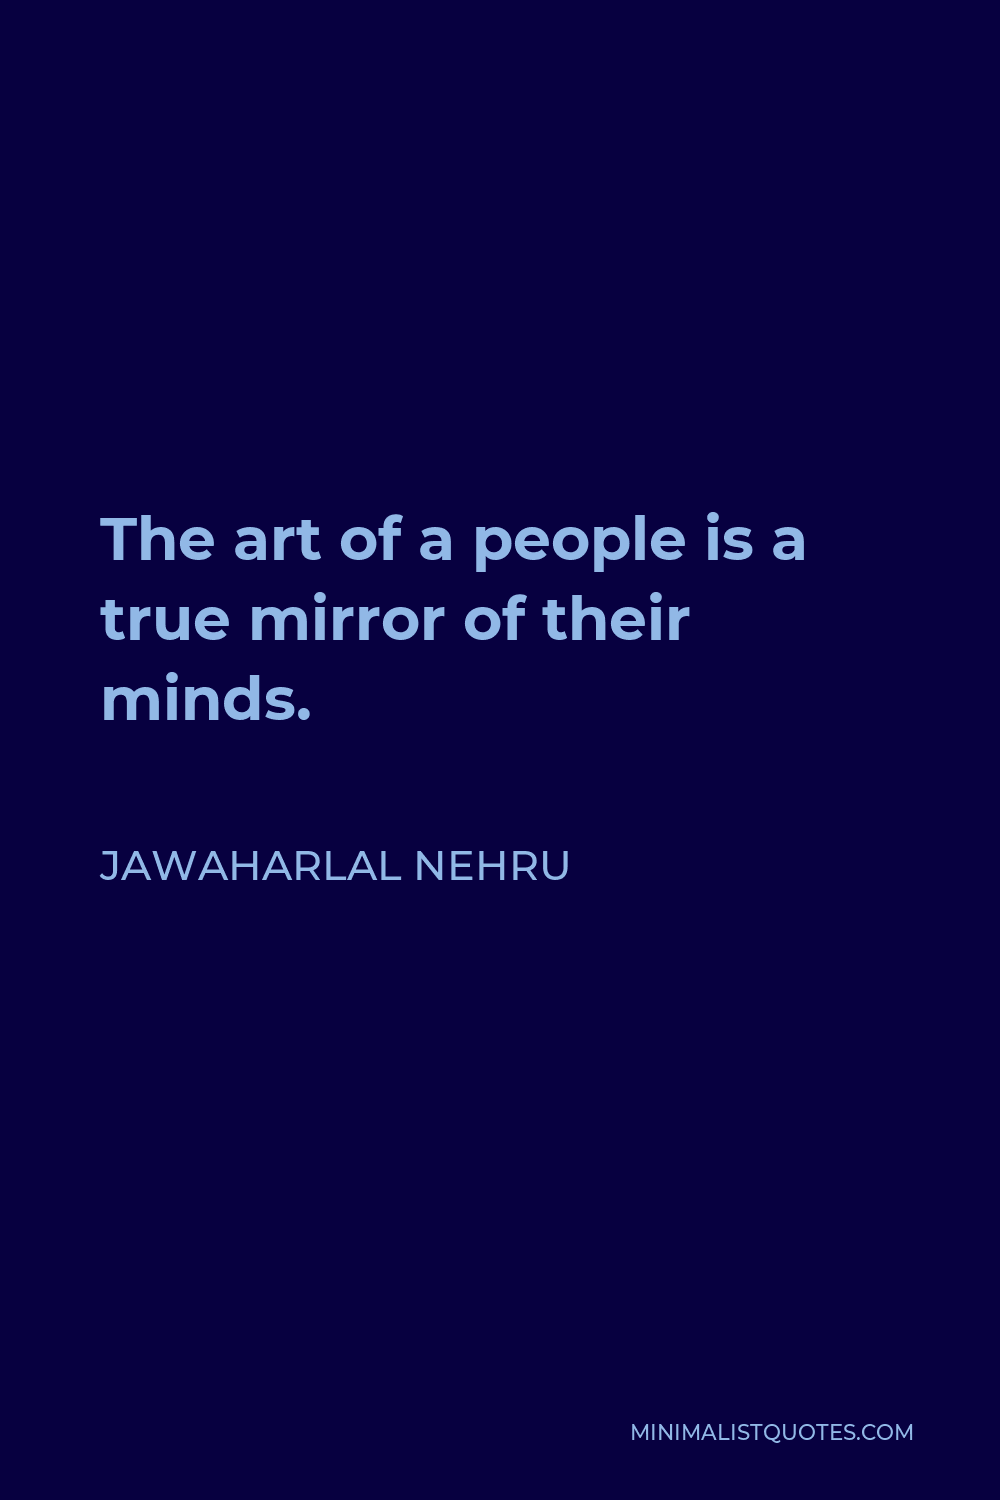 Jawaharlal Nehru Quote - The art of a people is a true mirror of their minds.